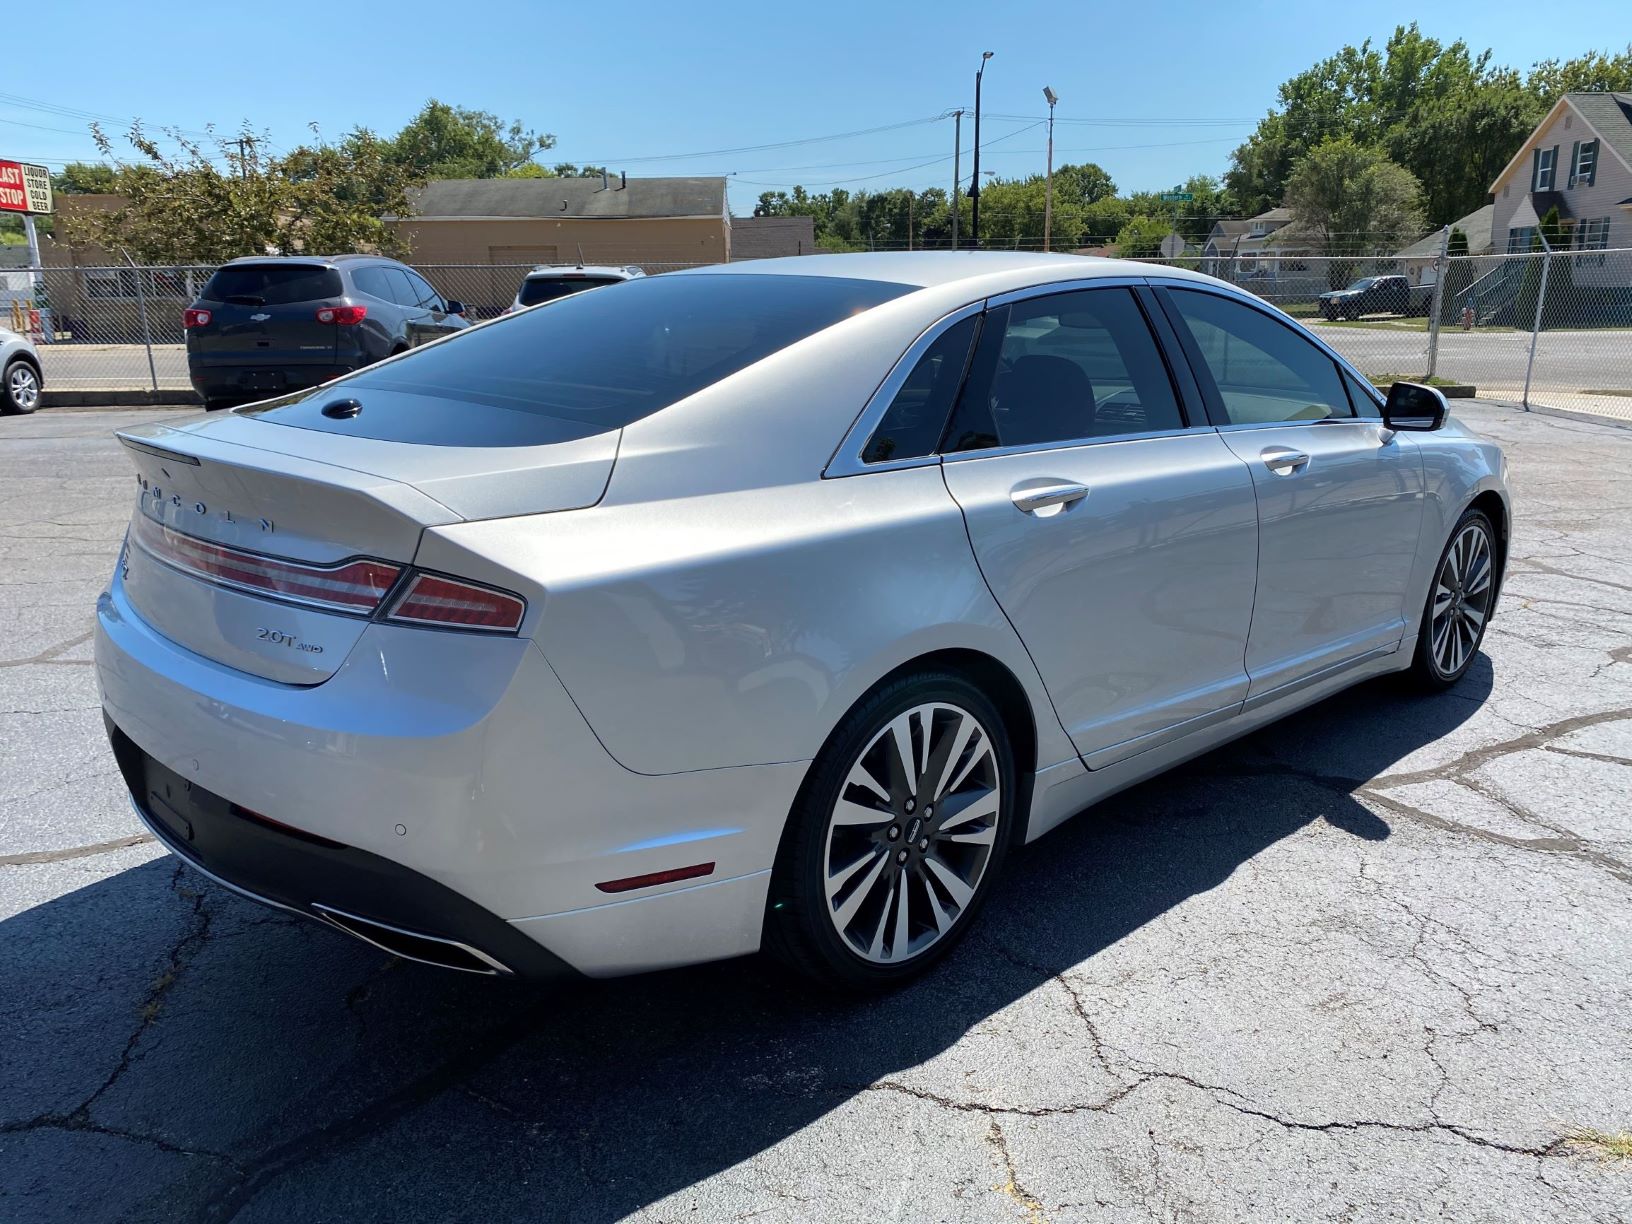 Simple 2017 Lincoln Mkz Exterior Colors for Simple Design